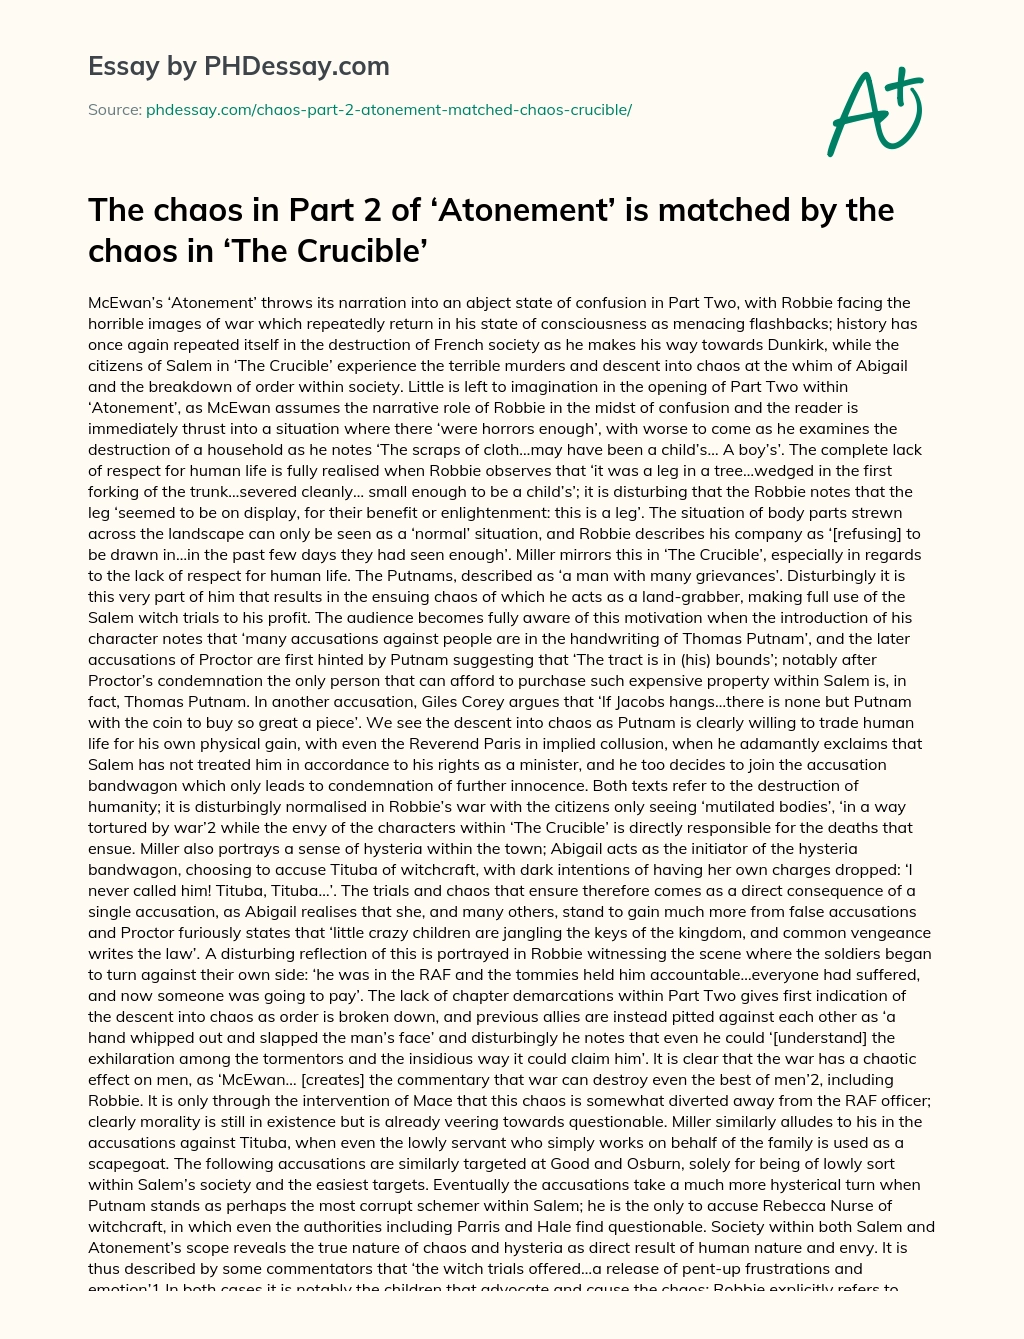 The chaos in Part 2 of ‘Atonement’ is matched by the chaos in ‘The Crucible’ essay